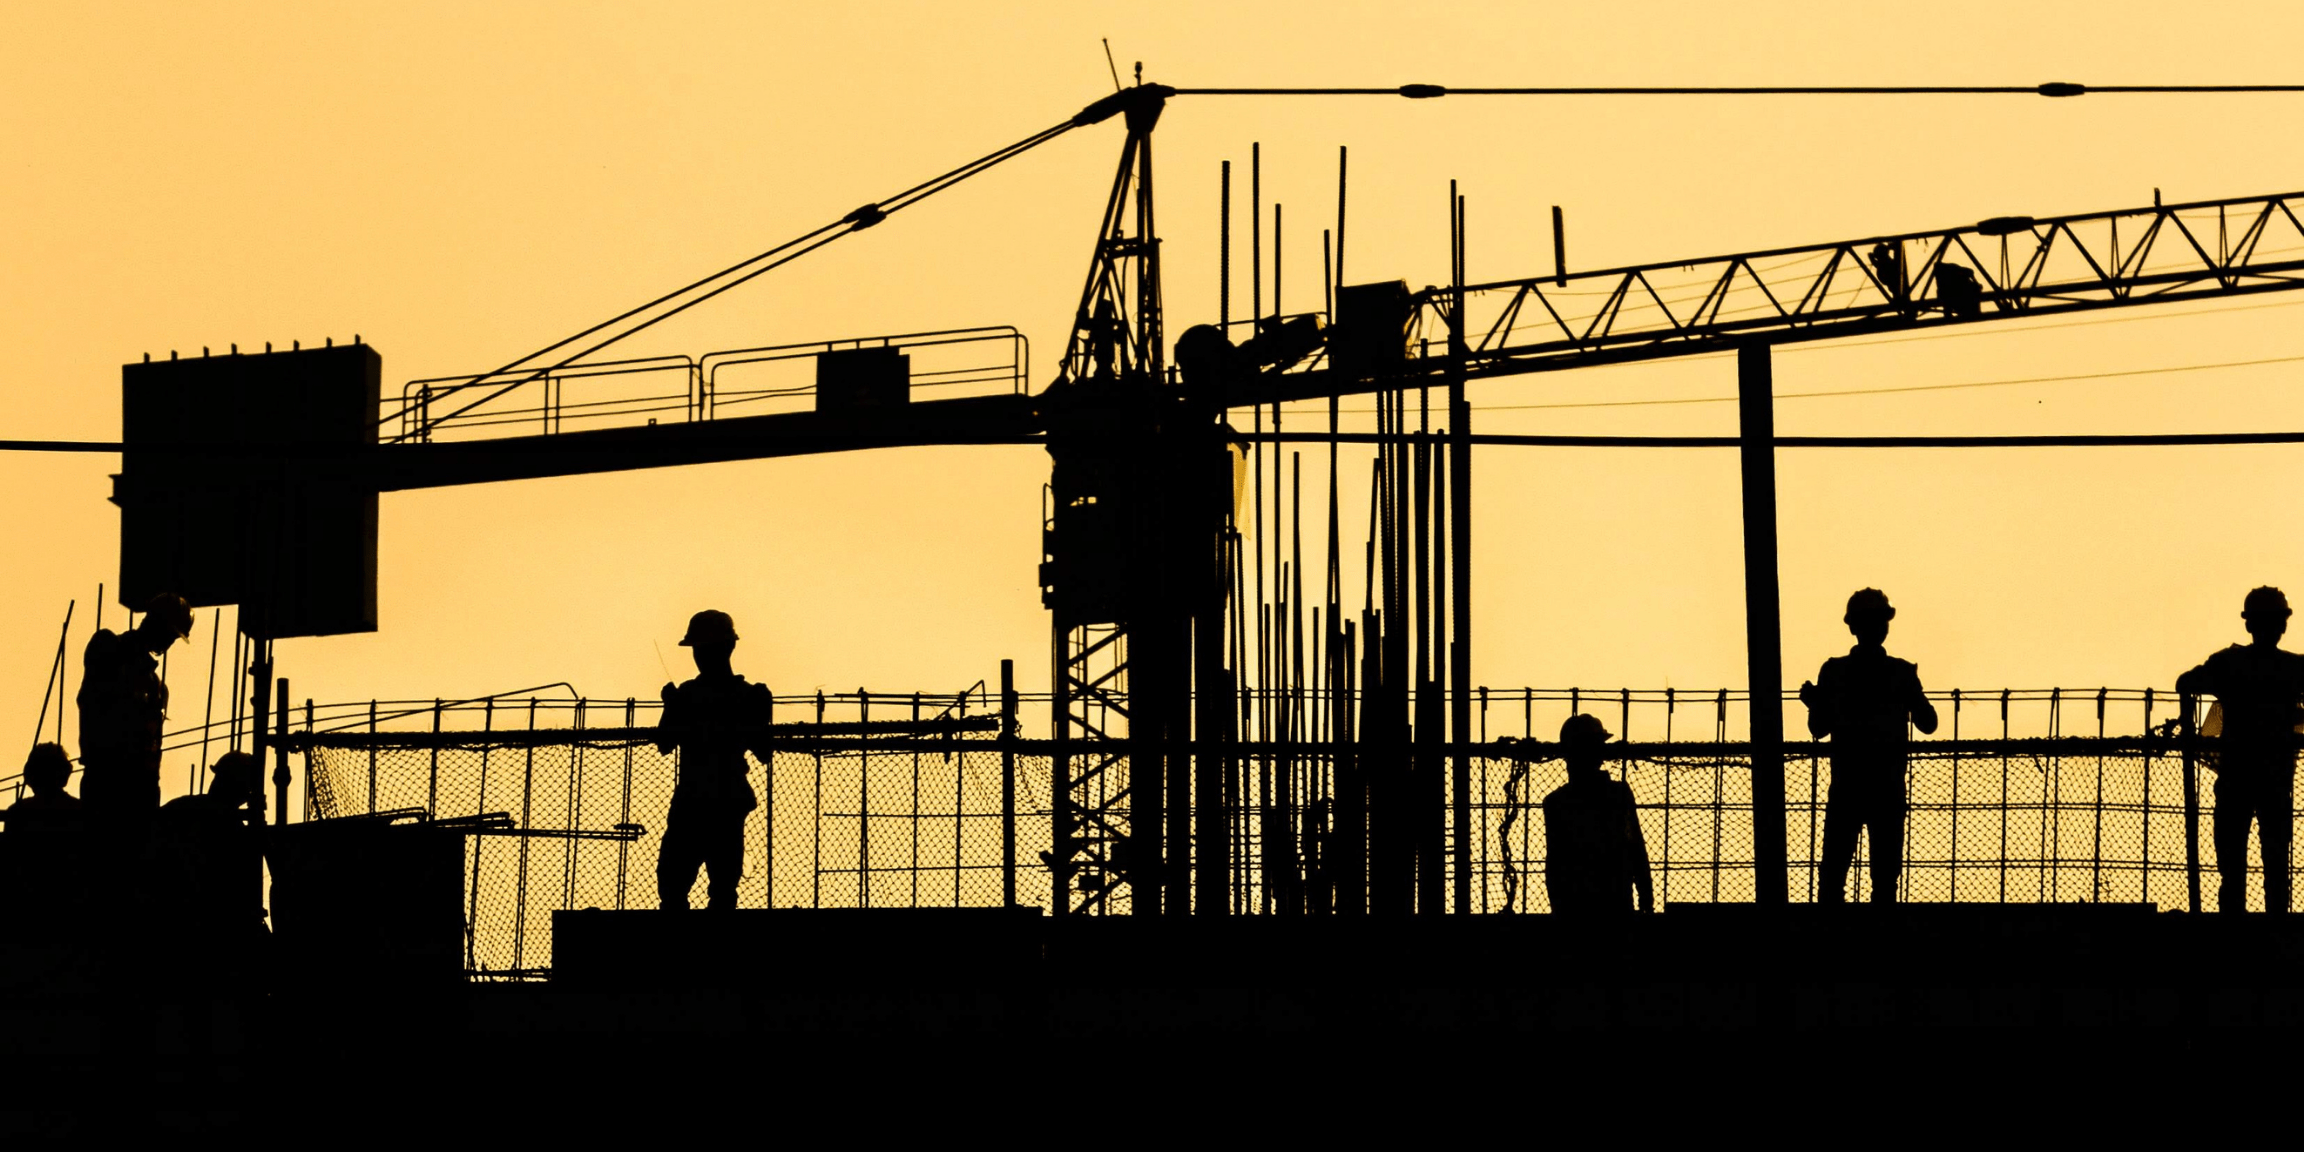 Construction workers and a tower crane silhouetted against an orange sky